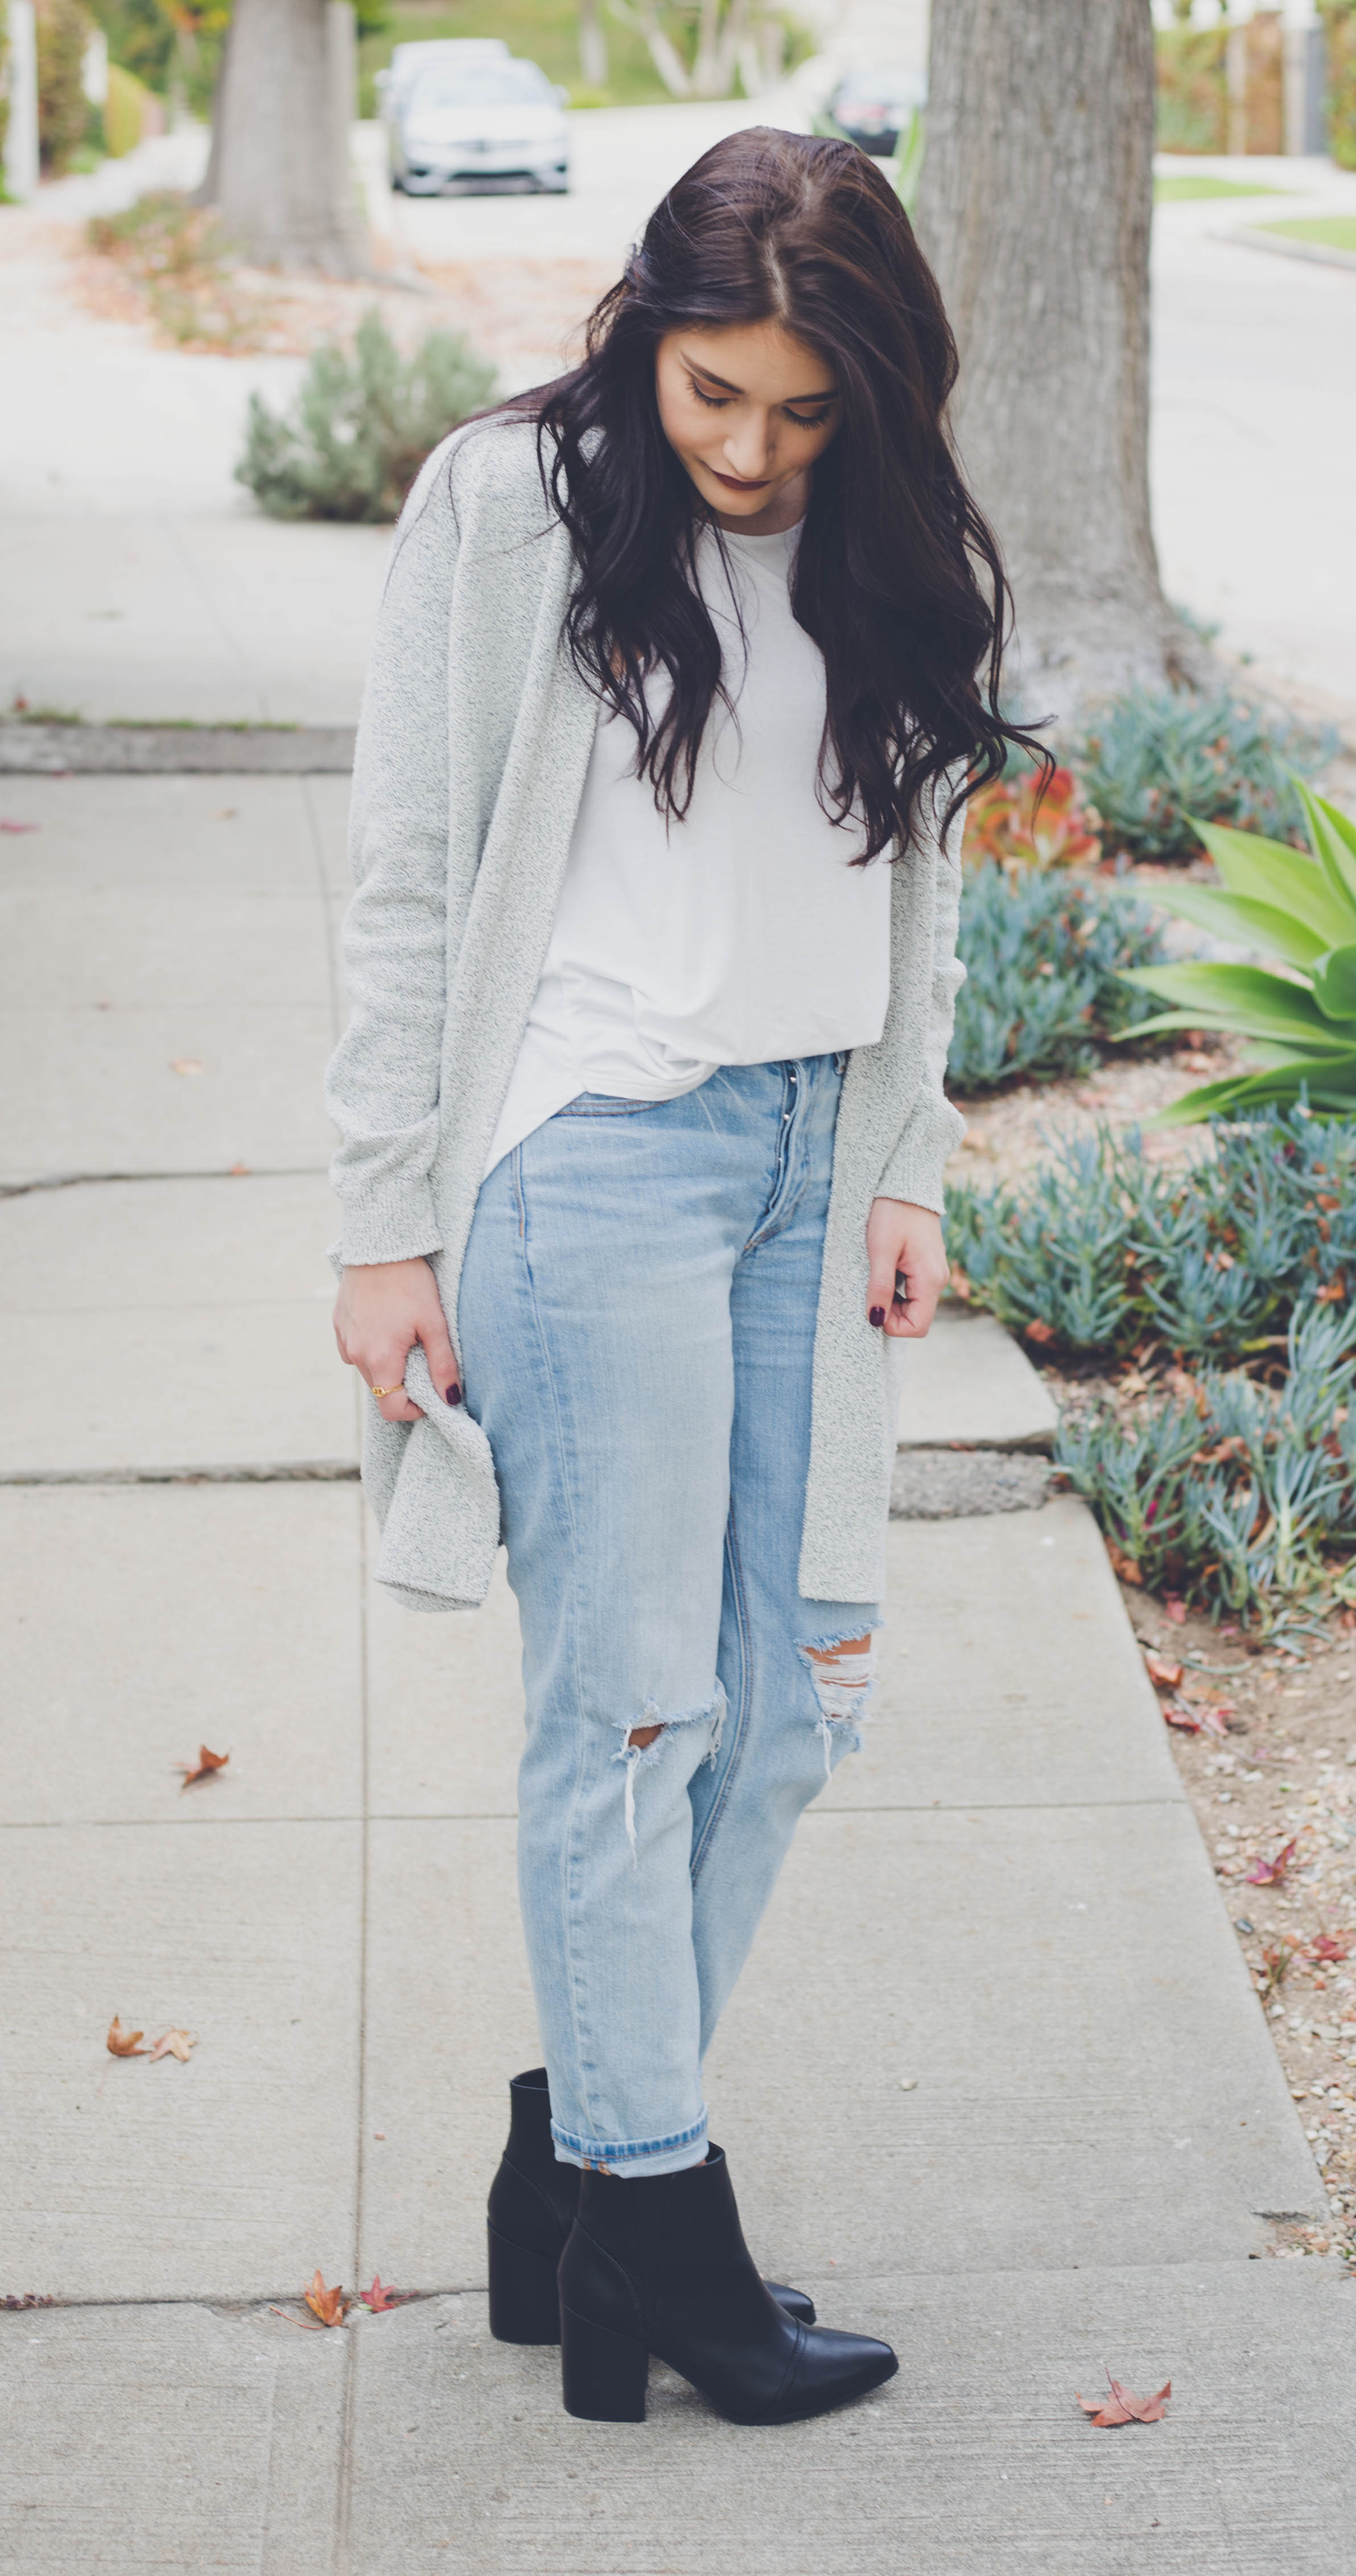 All About Vintage Jeans | Twinspiration 